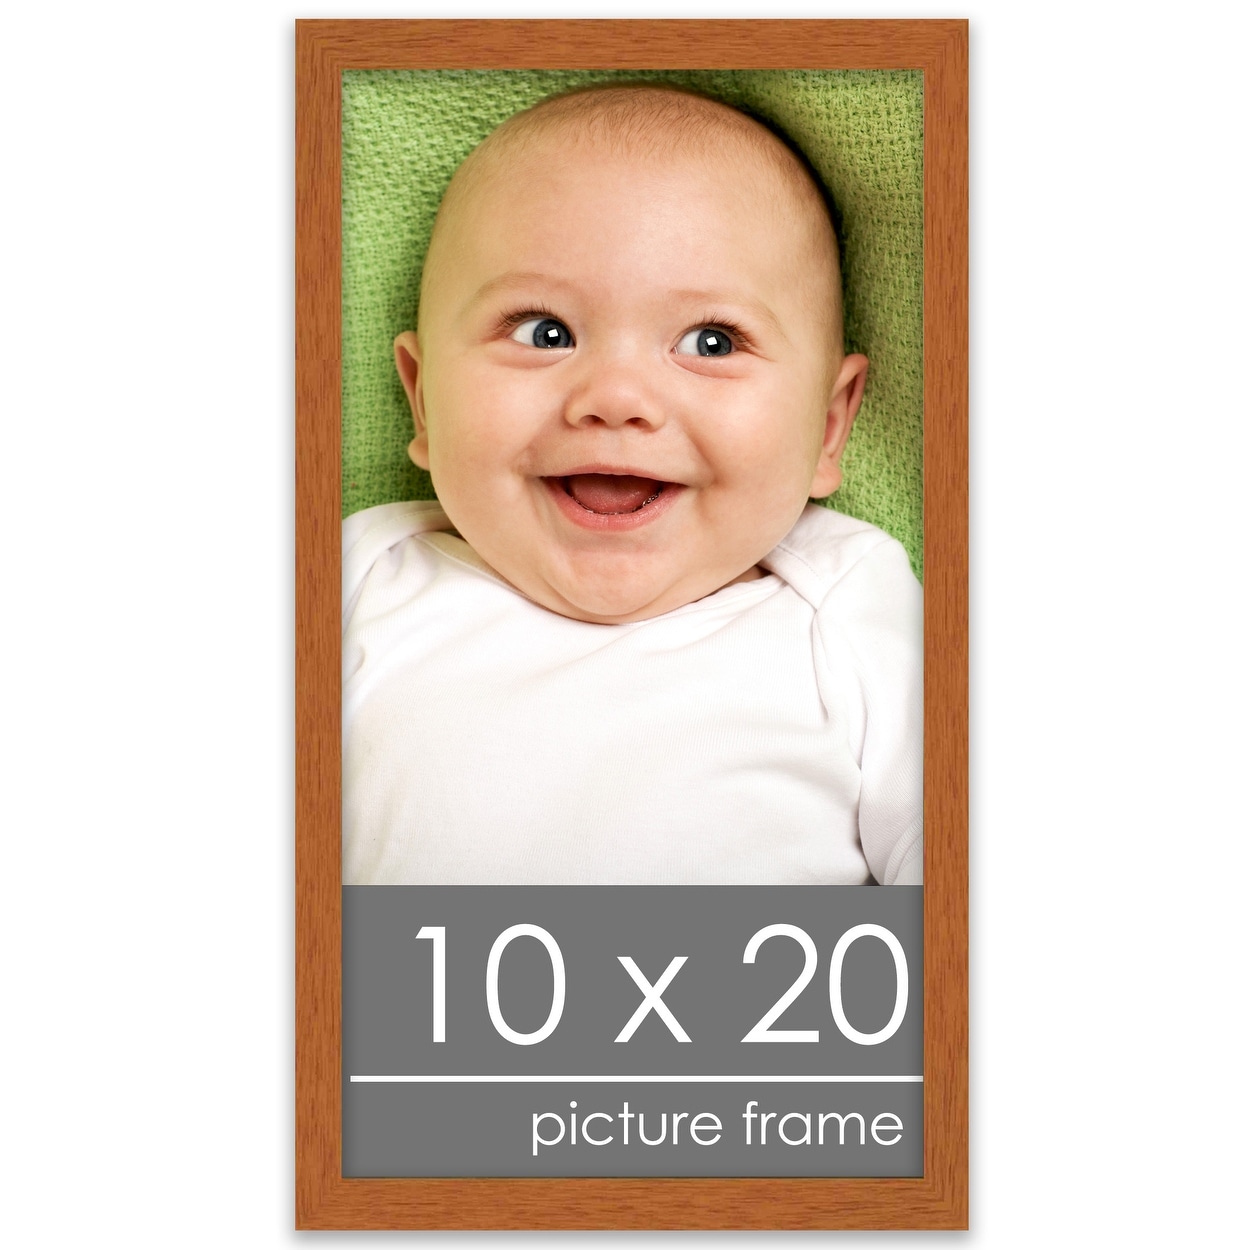 10x20 Traditional Honey Pecan Complete Wood Picture Frame with UV Acrylic, Foam Board Backing, & Hardware - Brown